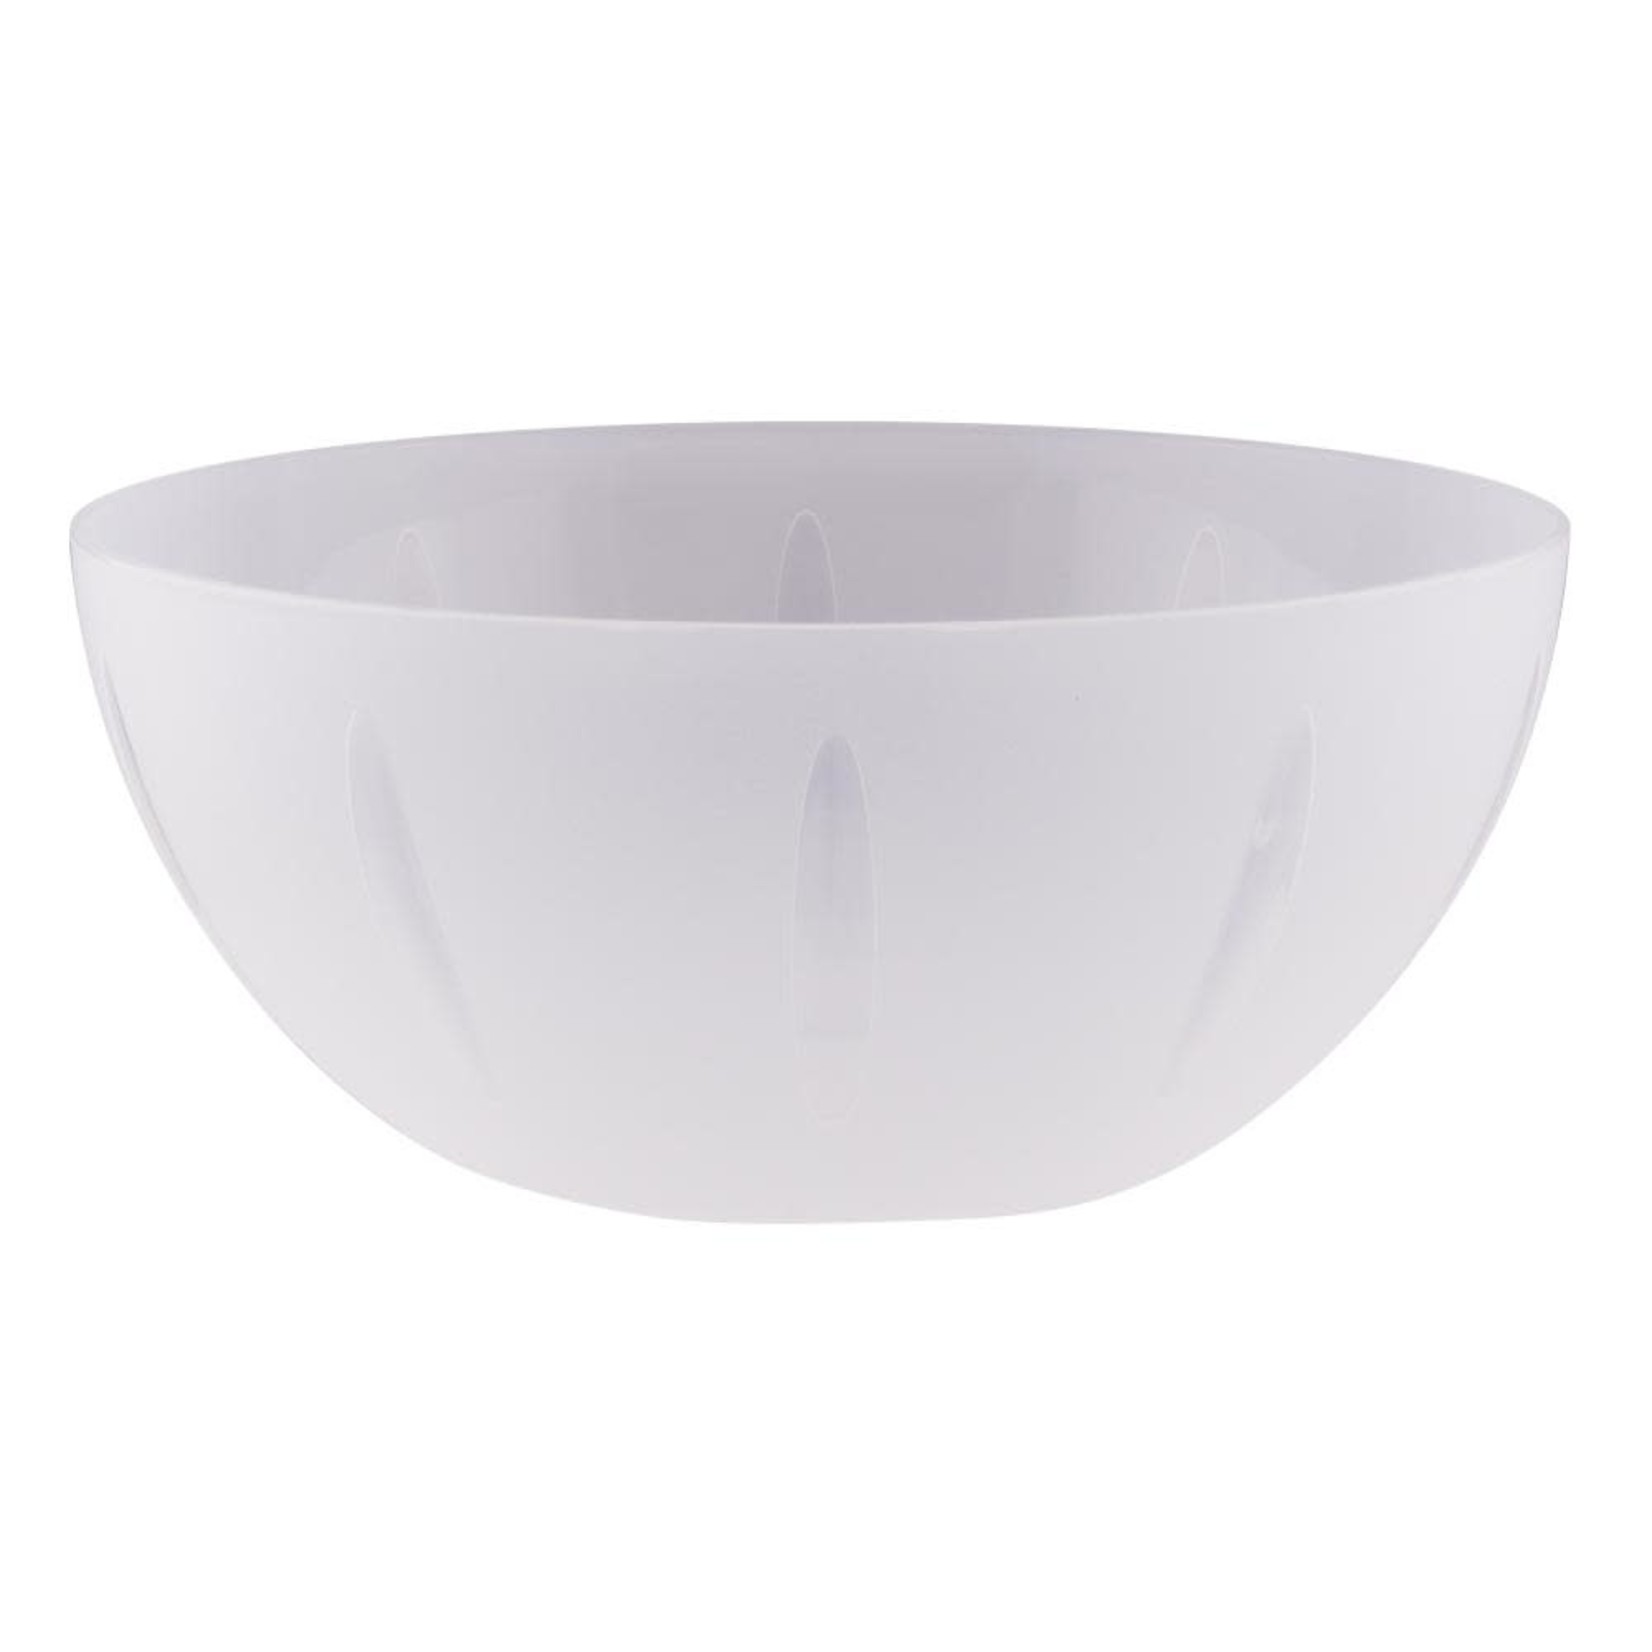 10 Inch Round Serving Bowl Assorted Colors